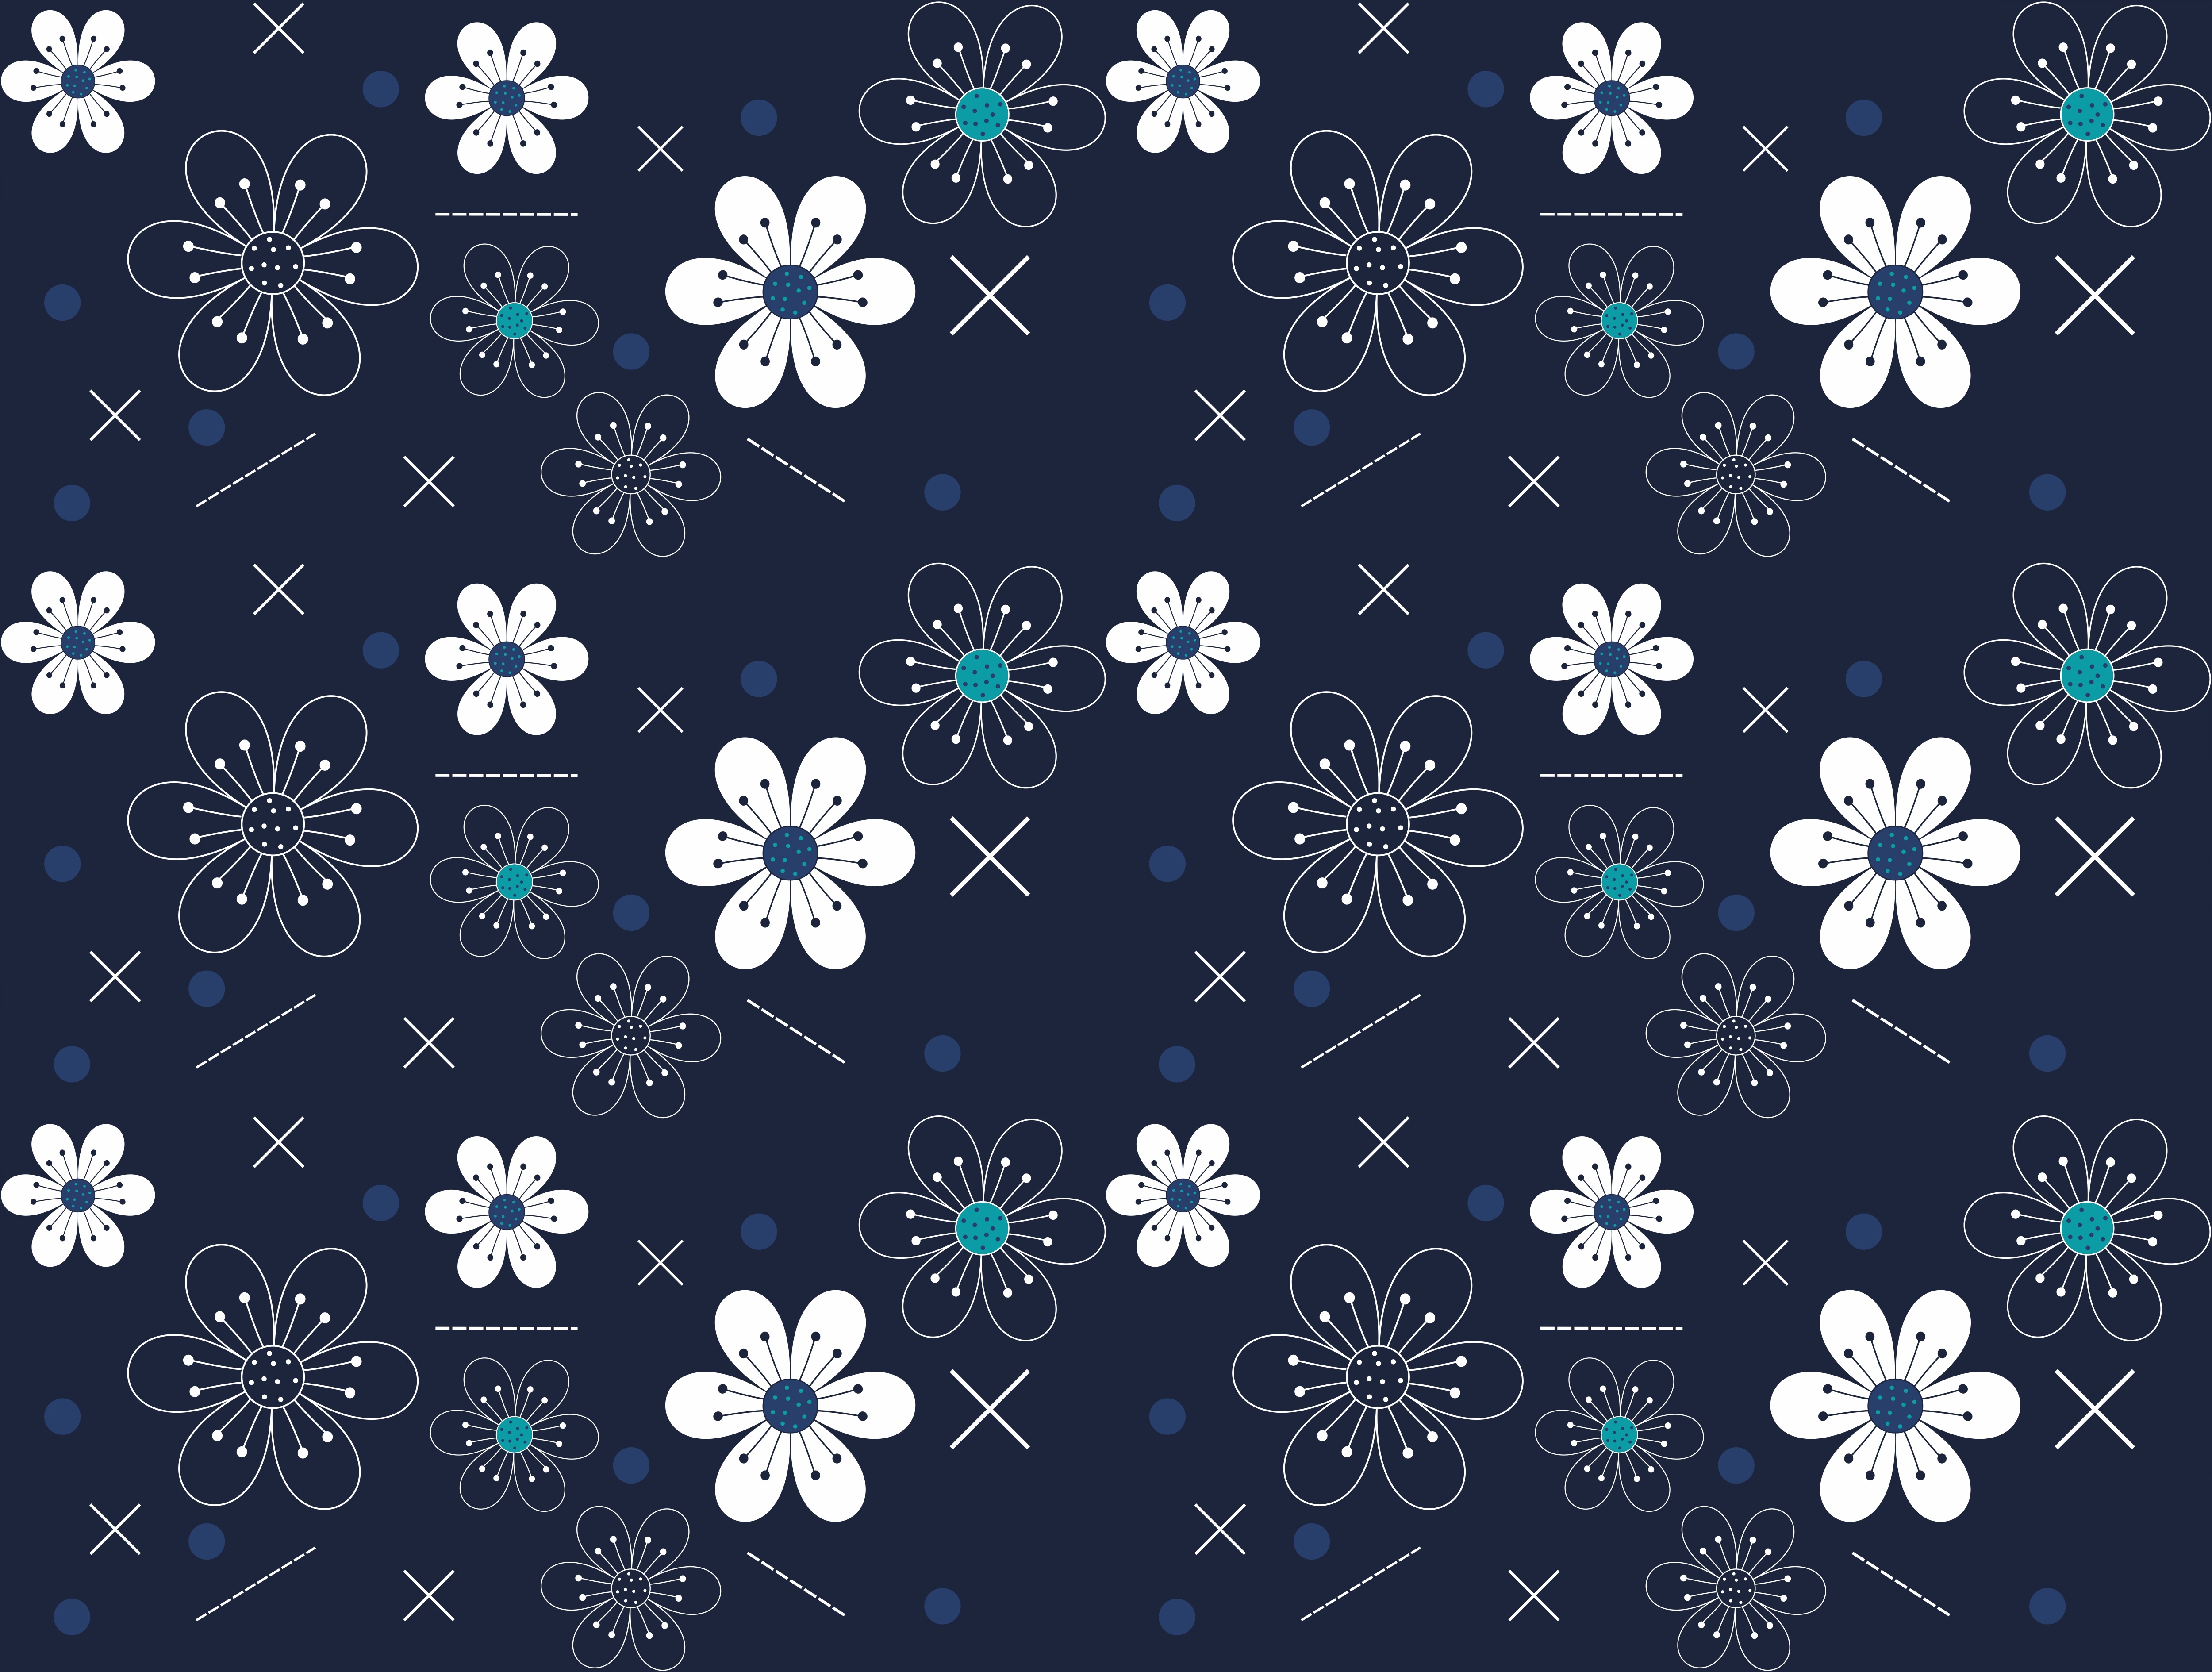 patterns, form, flowers, forms, vector images